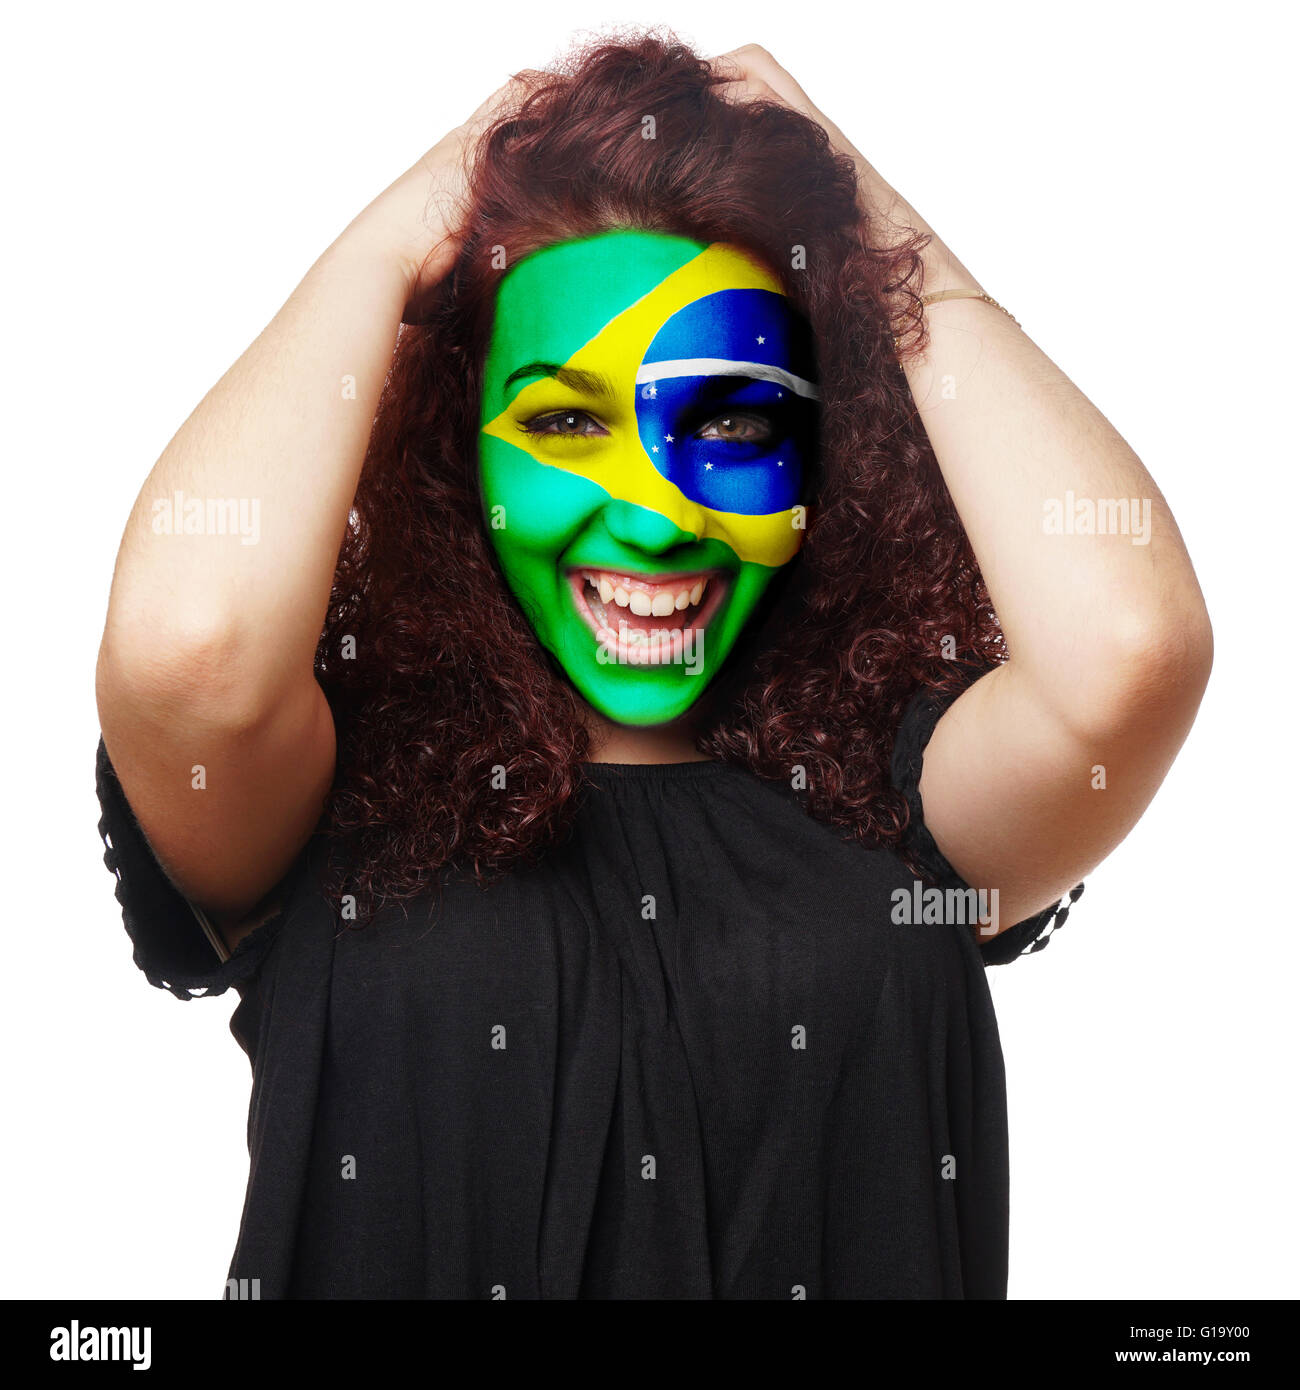 girl with brazilian flag face paint Stock Photo